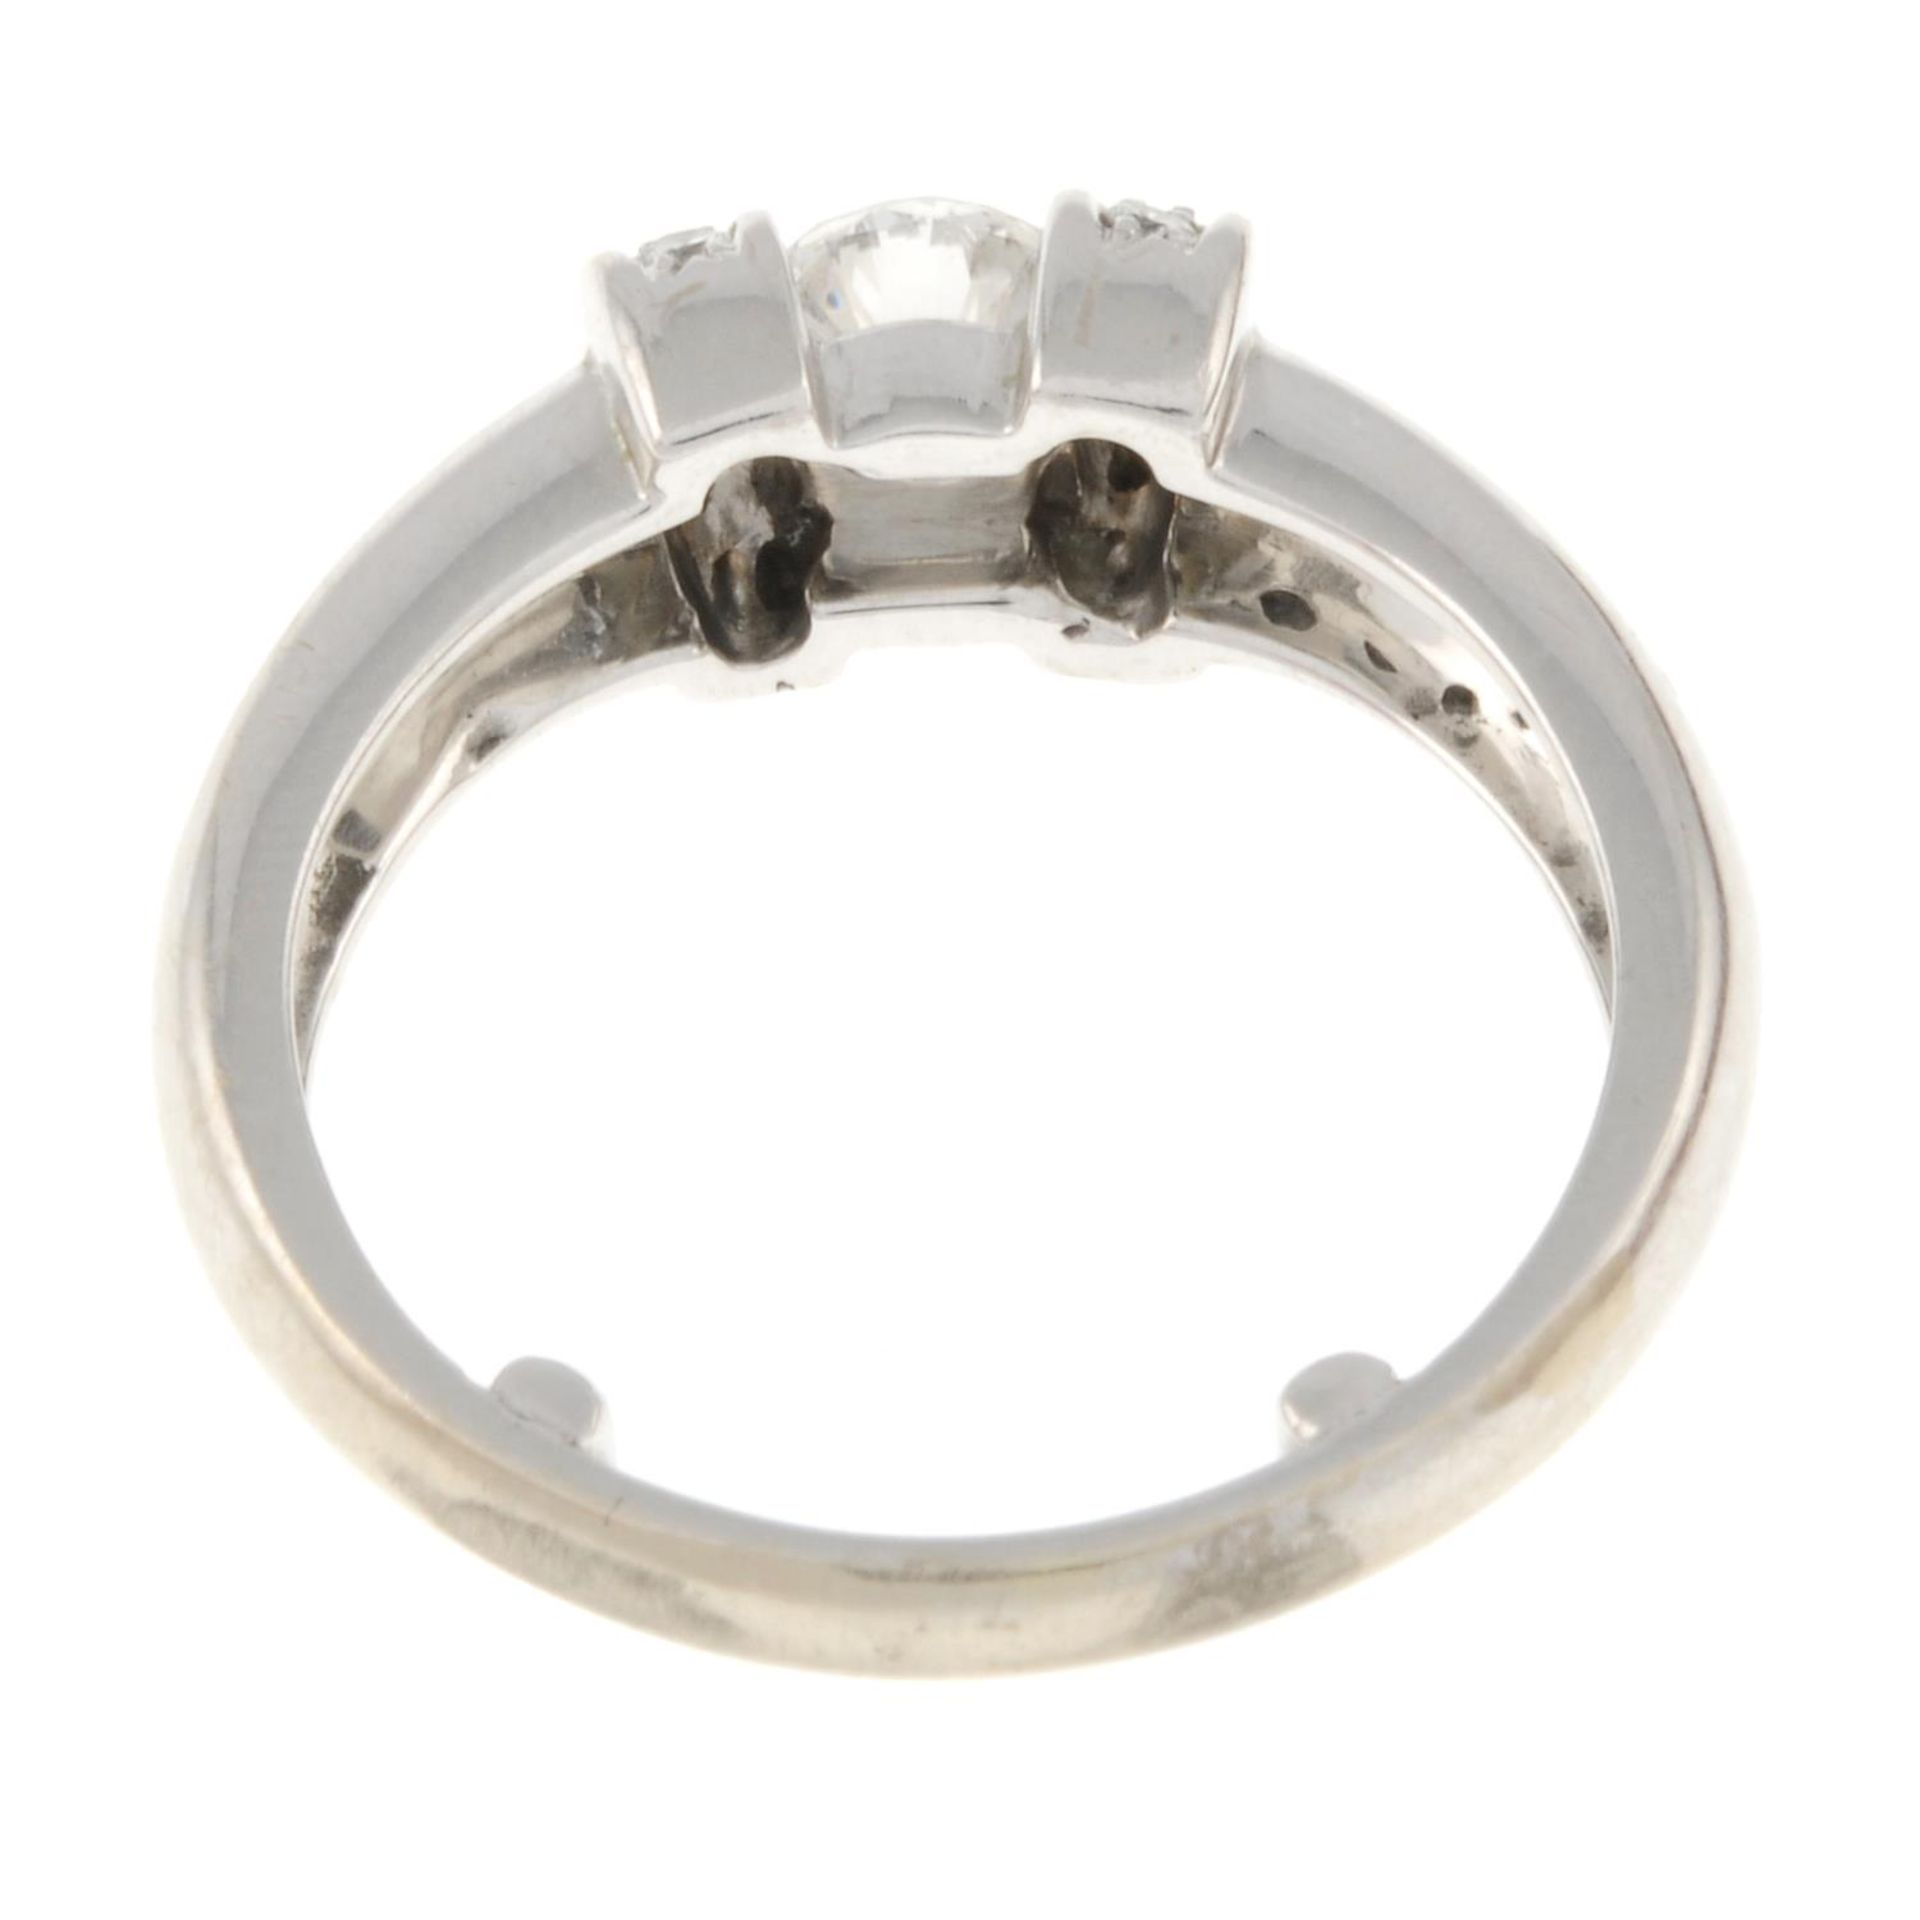 A brilliant-cut diamond ring.With inner sizing aid. - Image 4 of 4